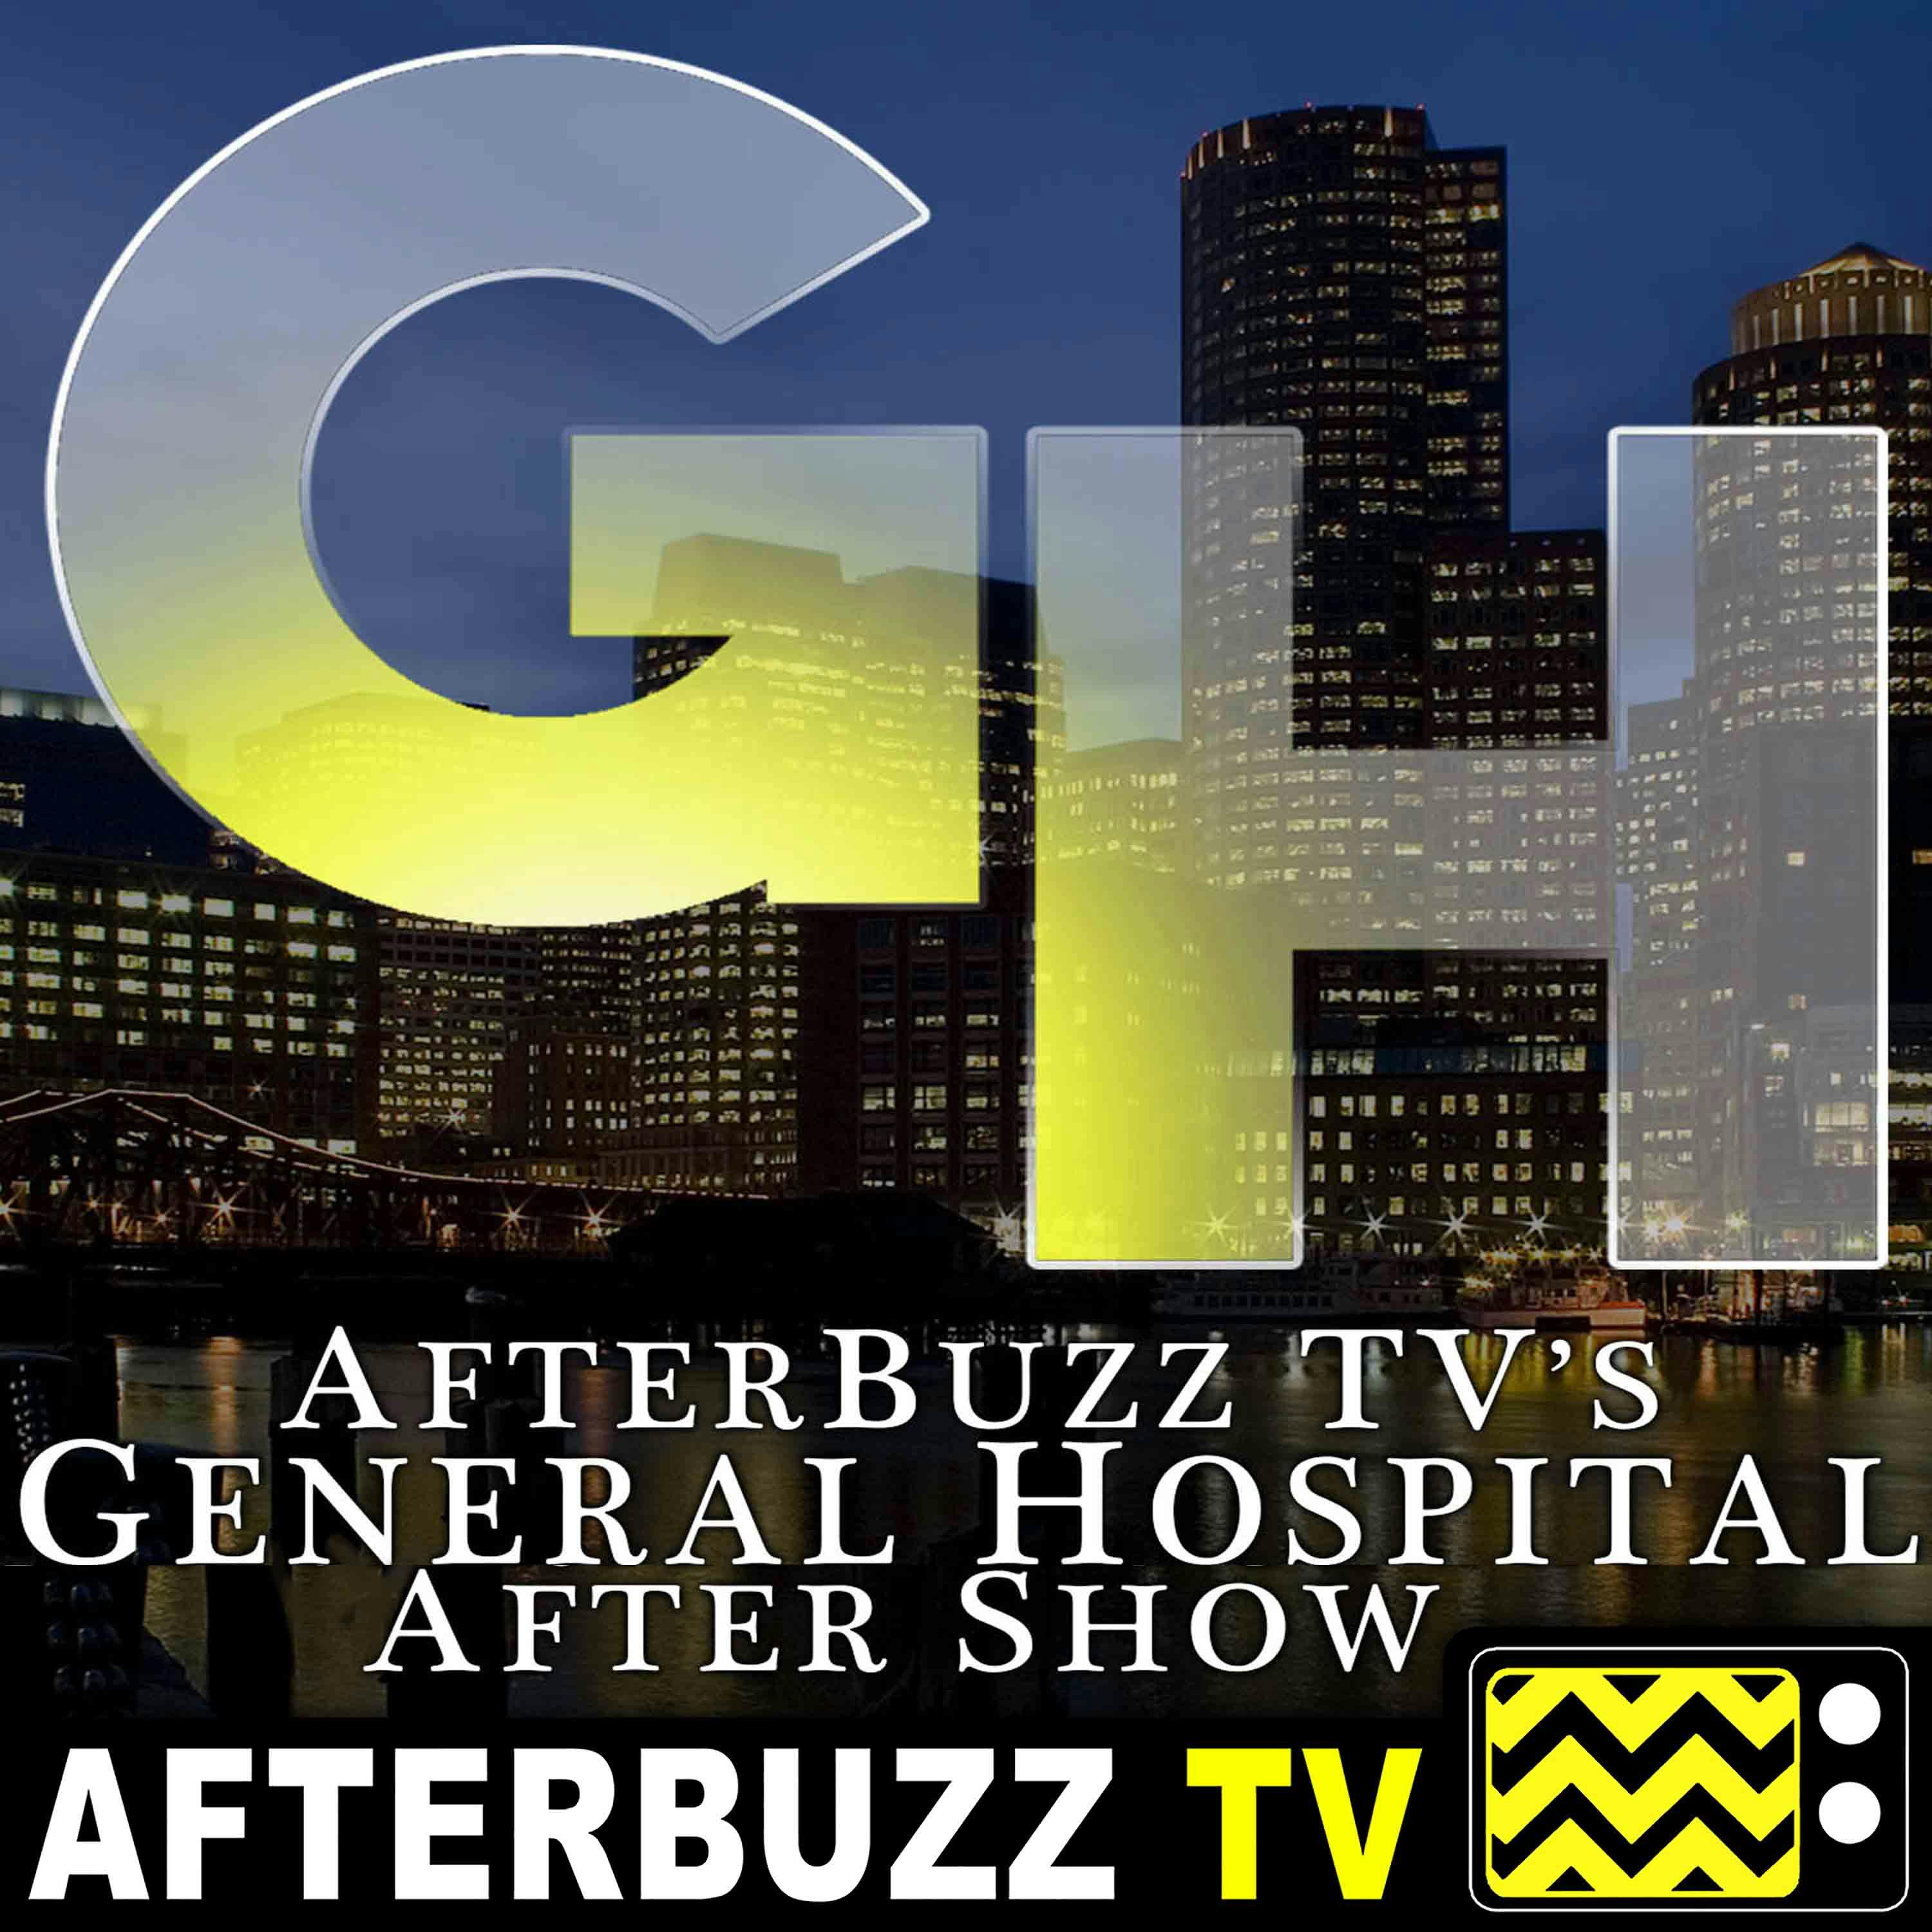 ’March 25th - March 29th, 2019’ Review Of General Hospital